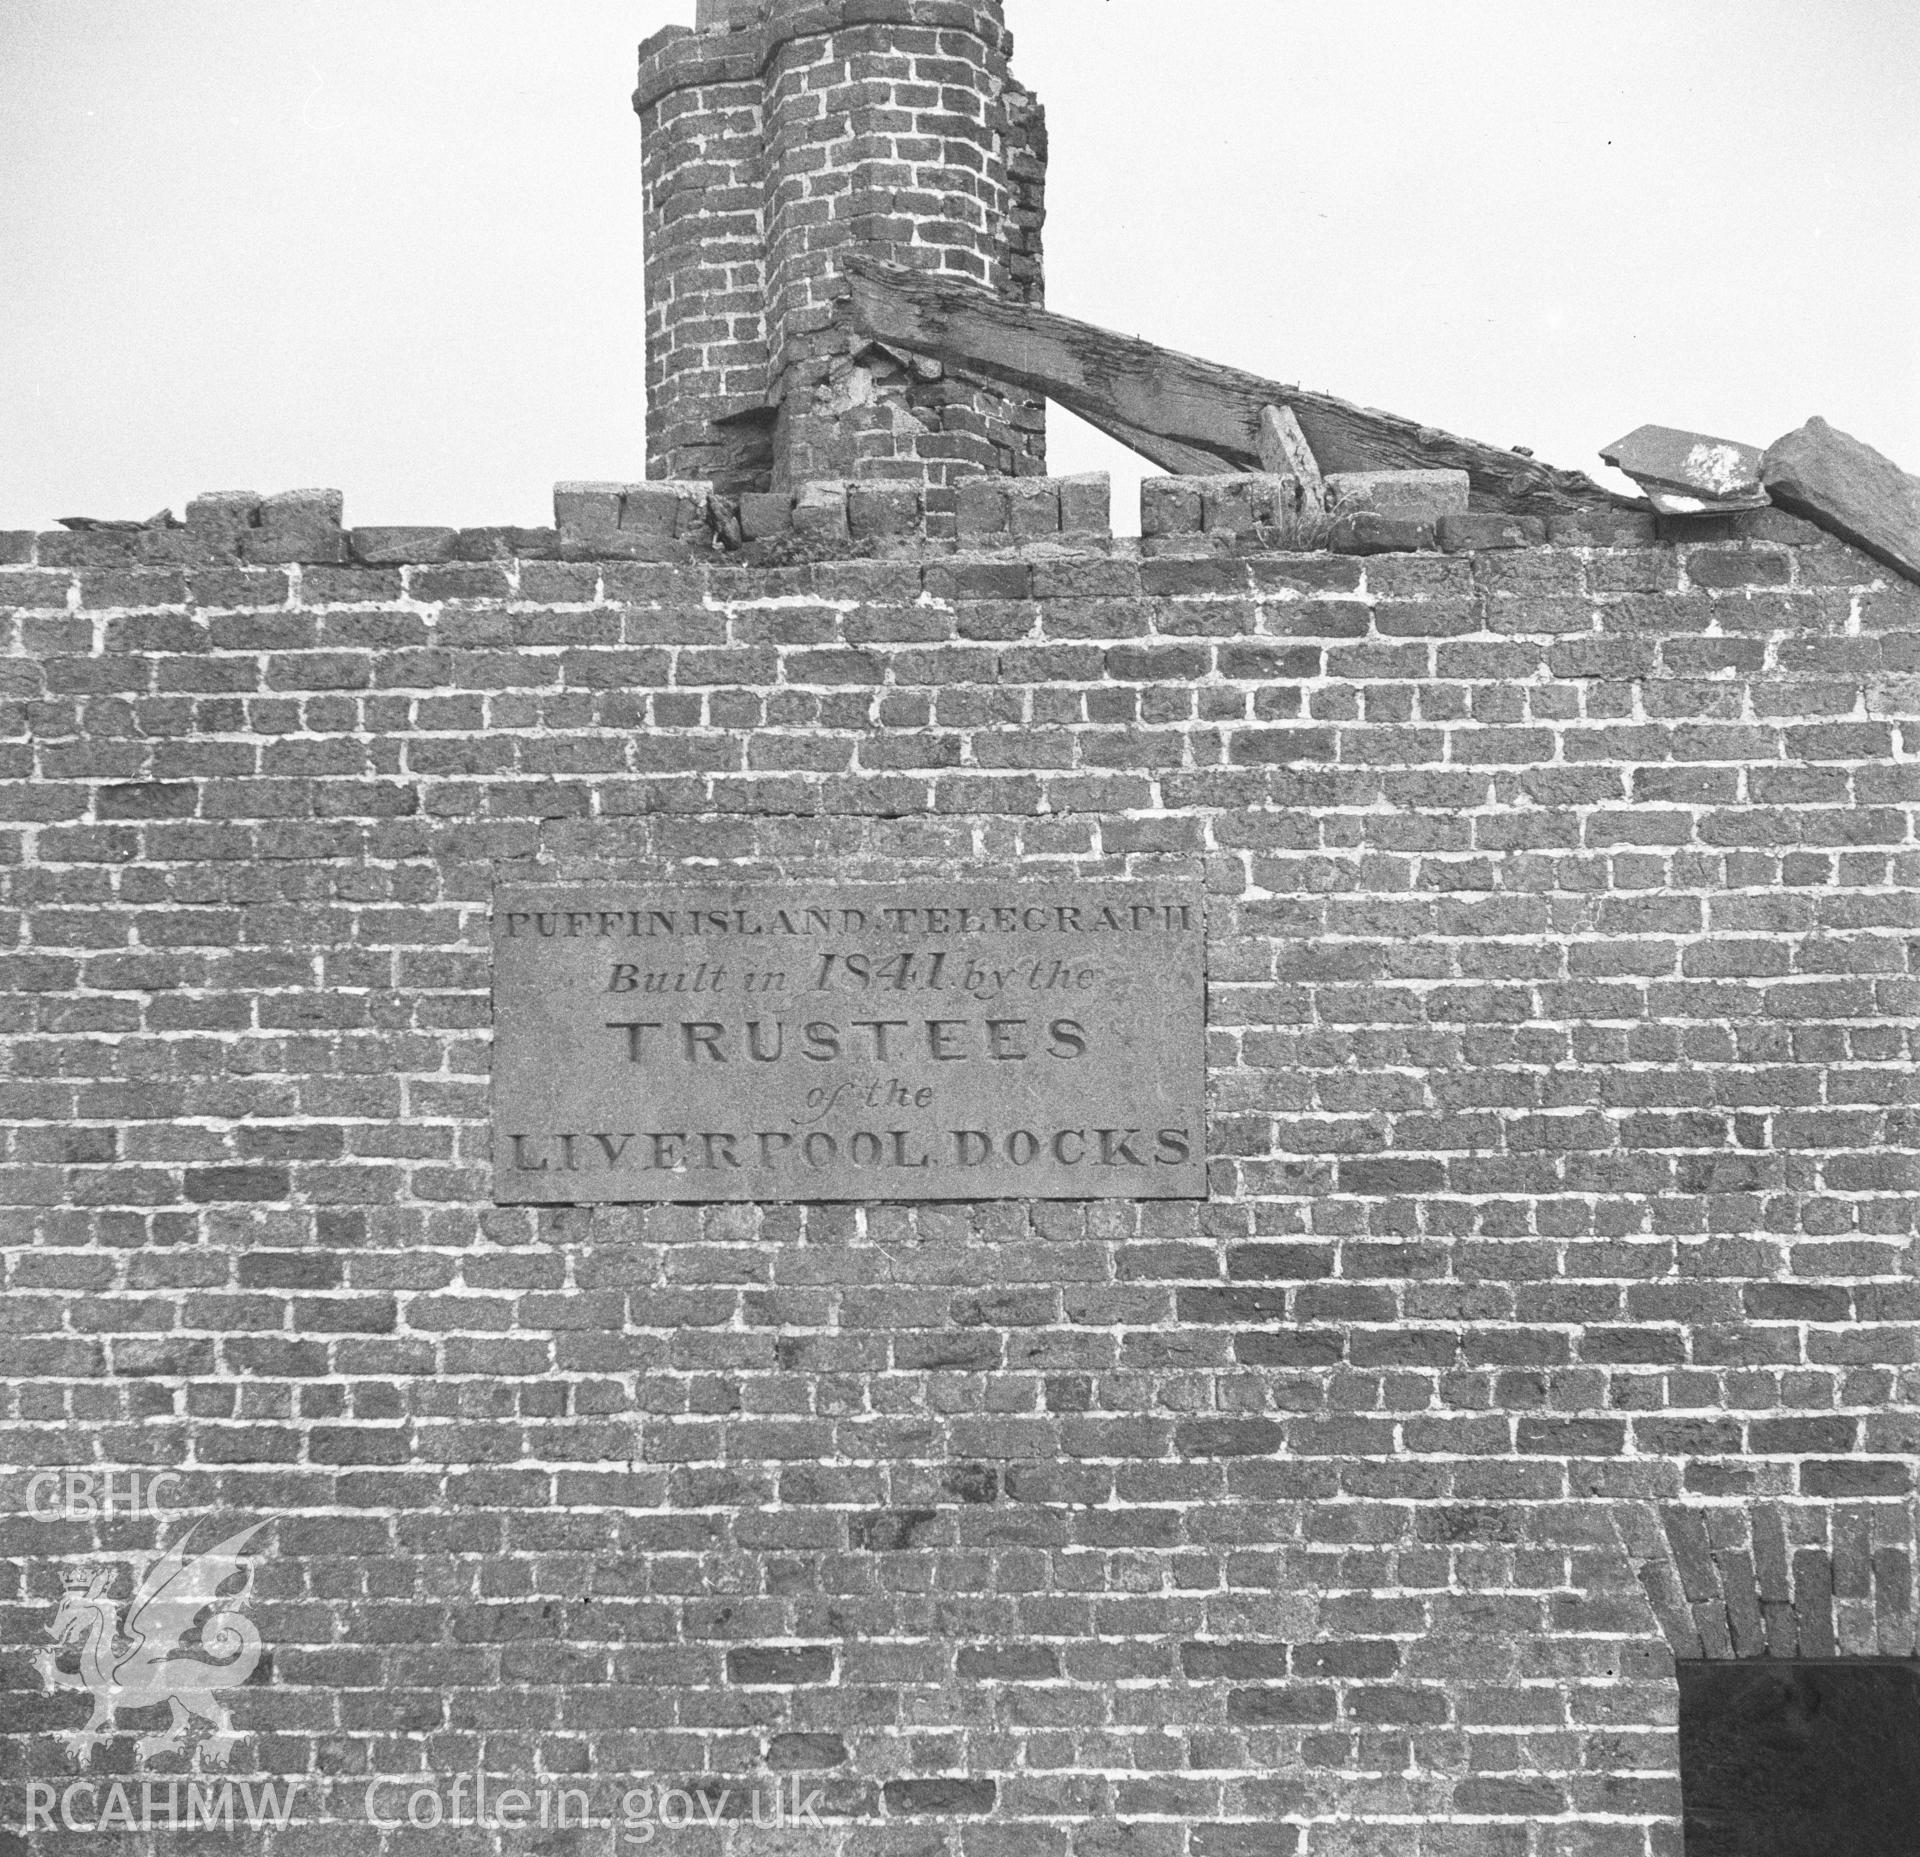 Digital copy of a black and white negative showing plaque on the Telegraph Building, Puffin Island.